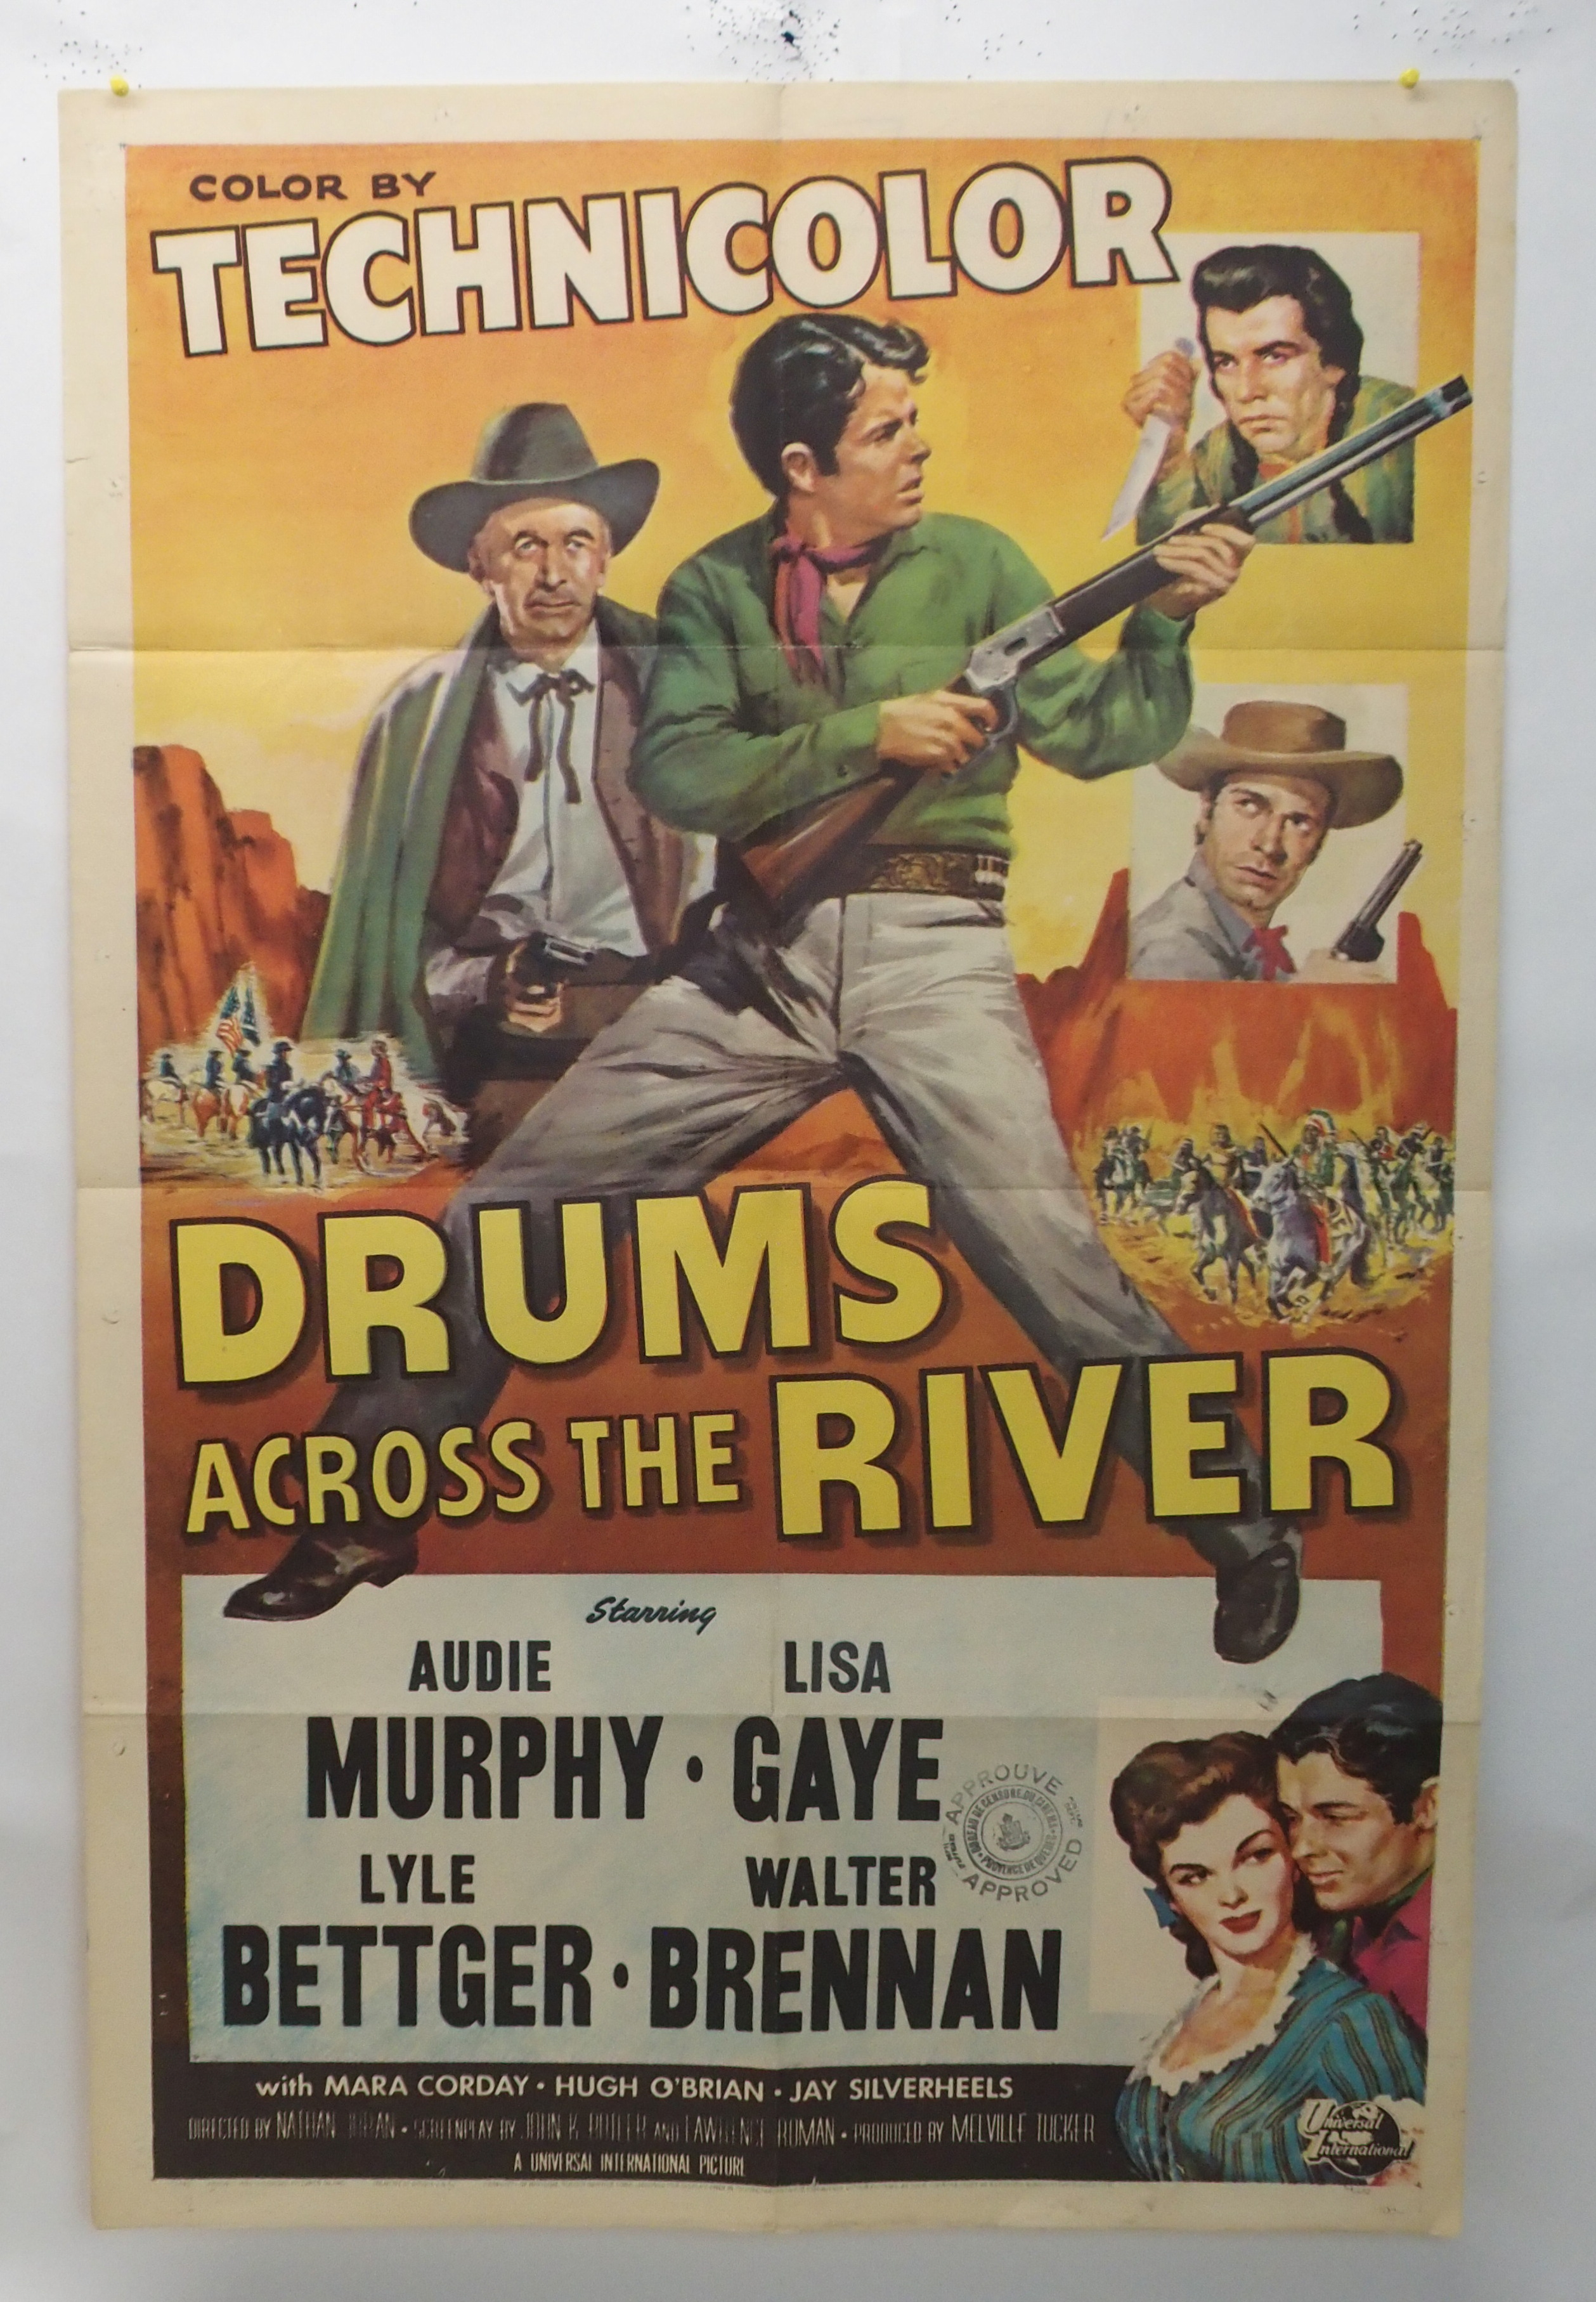 AUDIE MURPHY: COLUMN SOUTH original movie poster, 1953, horizontal and vertical folds, 105 x 68cm - Image 2 of 6